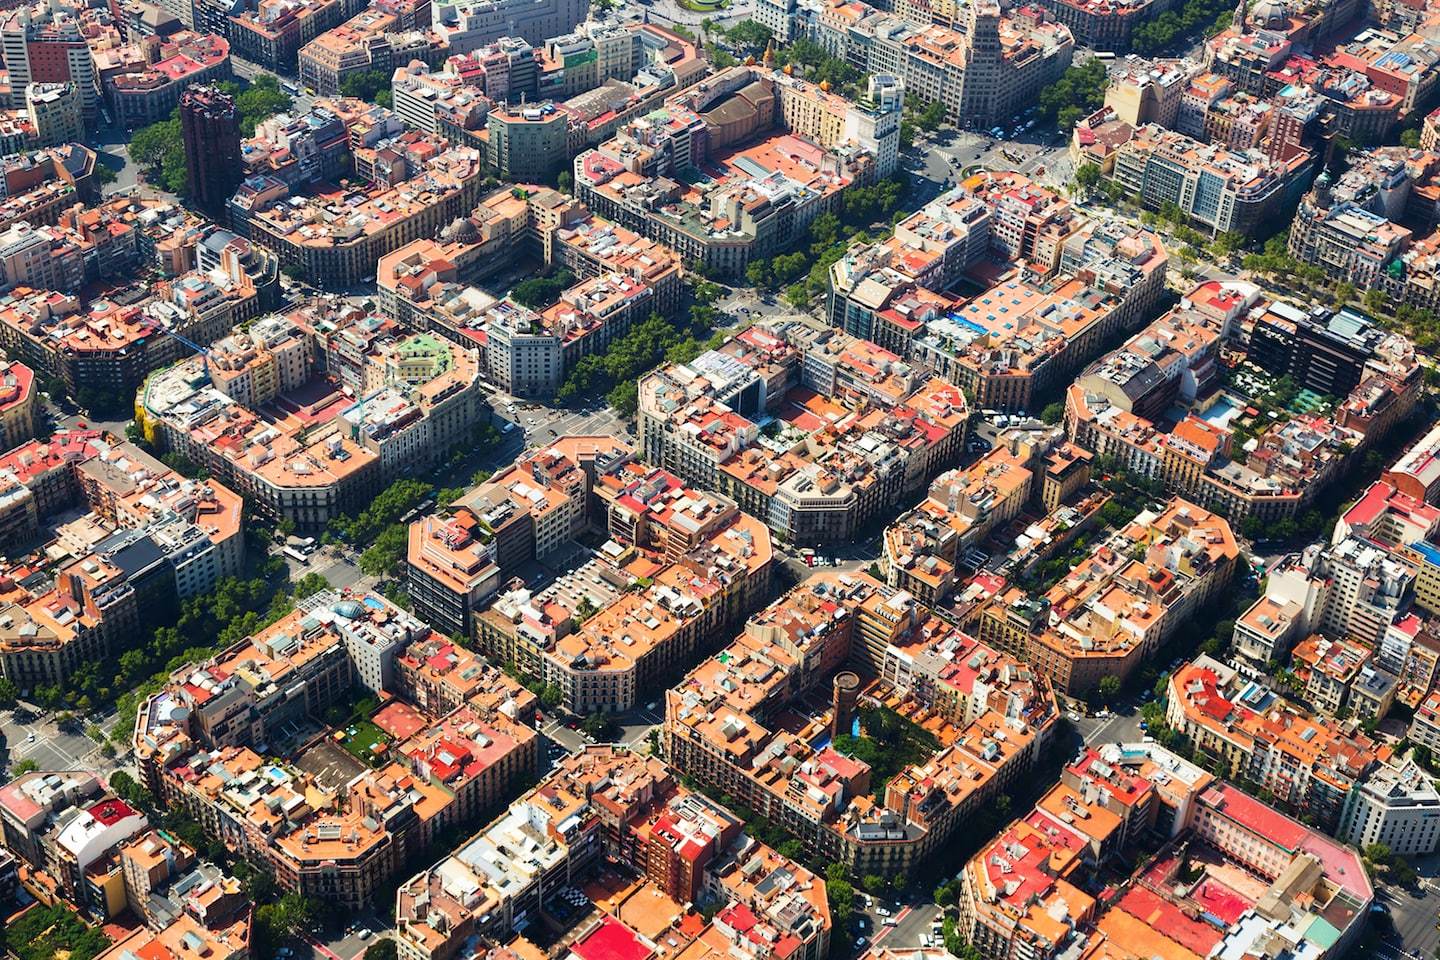 residential home formations in barcelona, spain